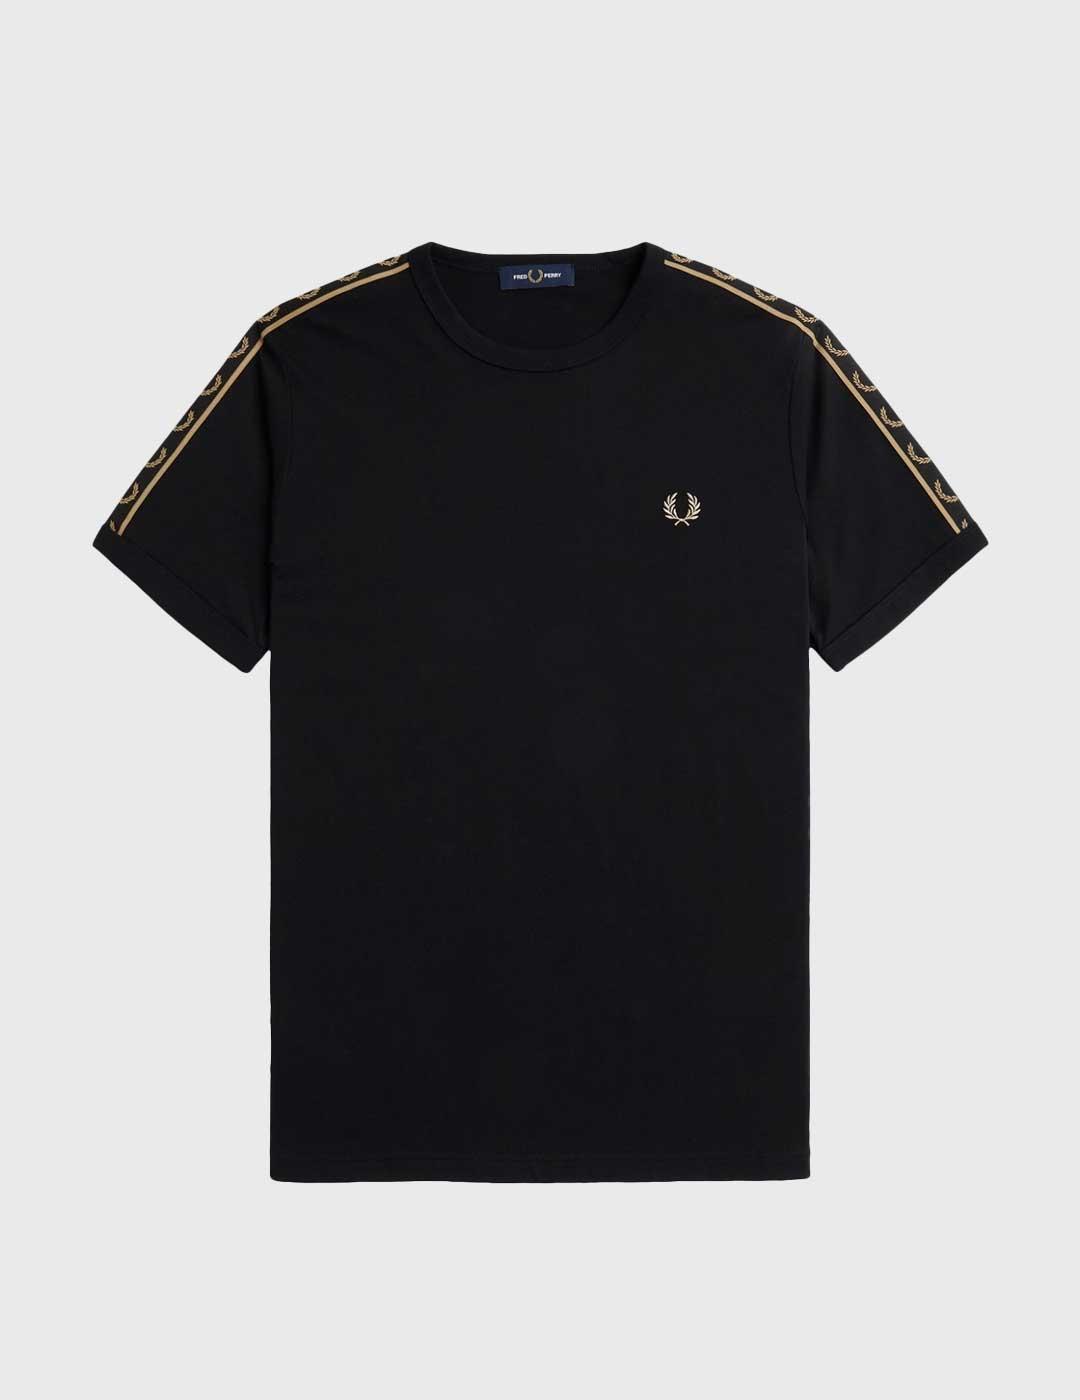 Fred Perry Contrast Tape Ringer Camiseta negra para hombre